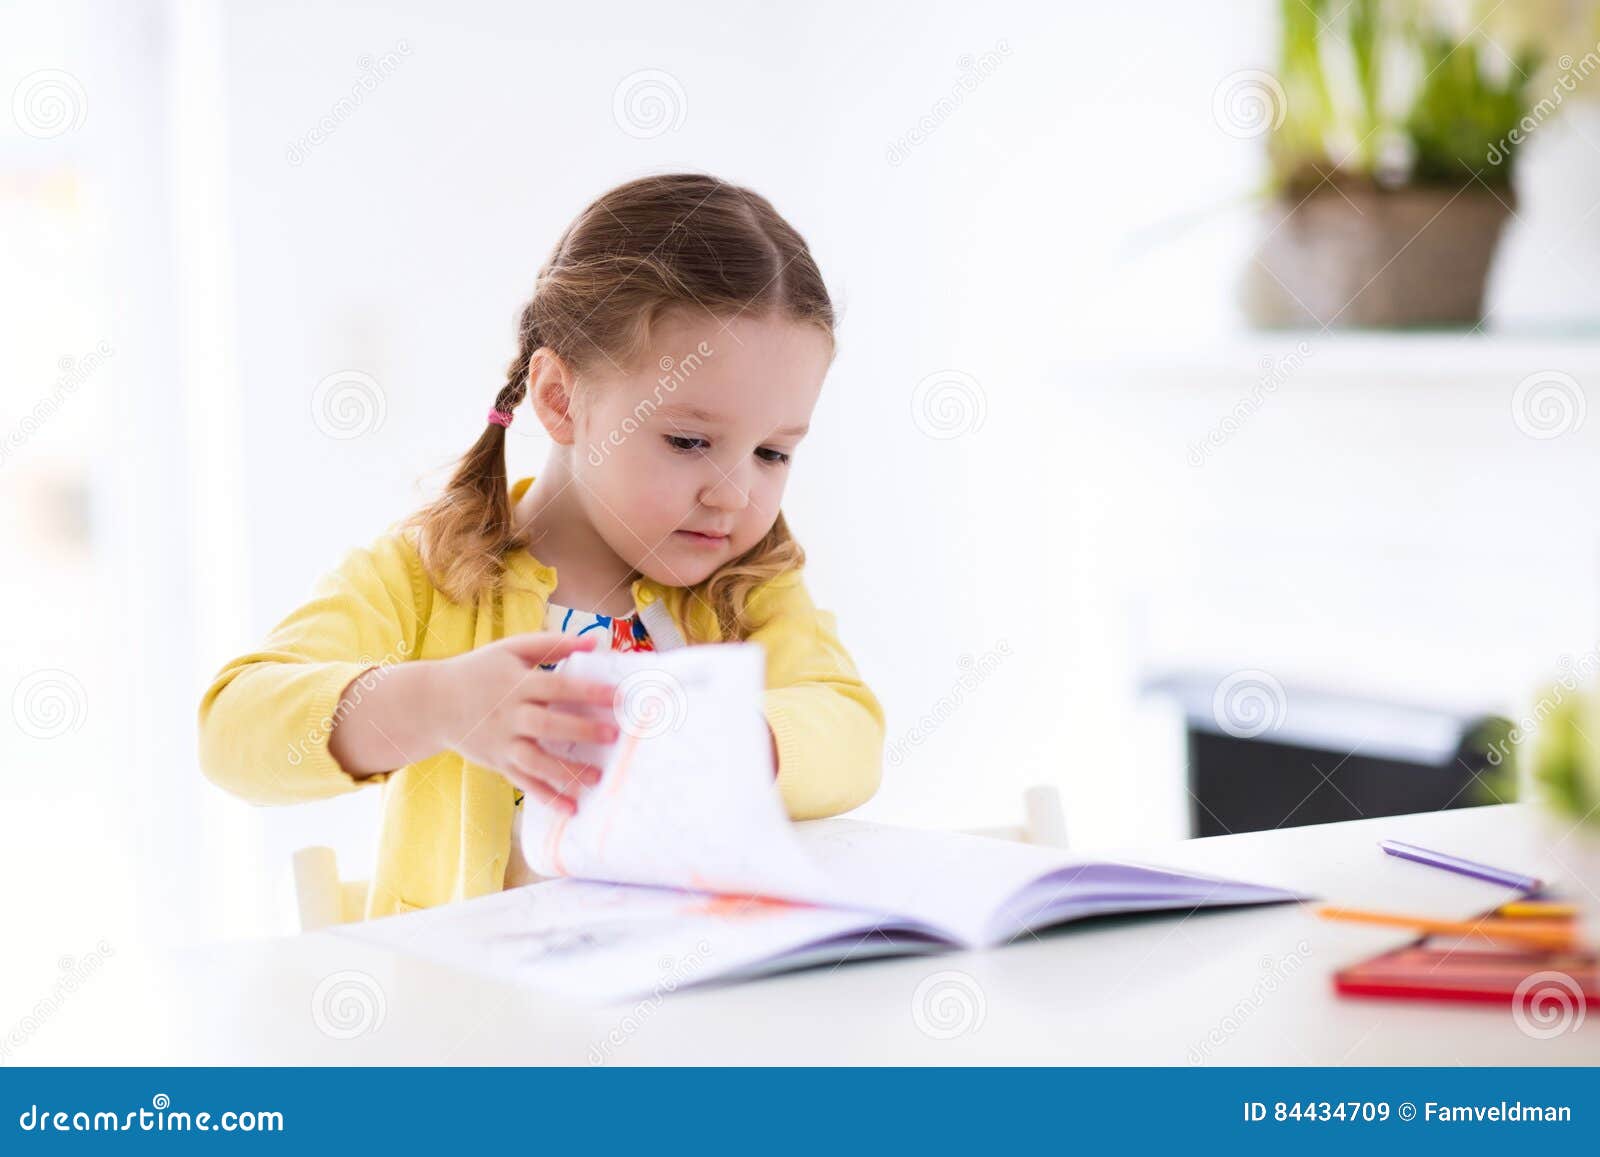 Essay on Reading on reading books for kids